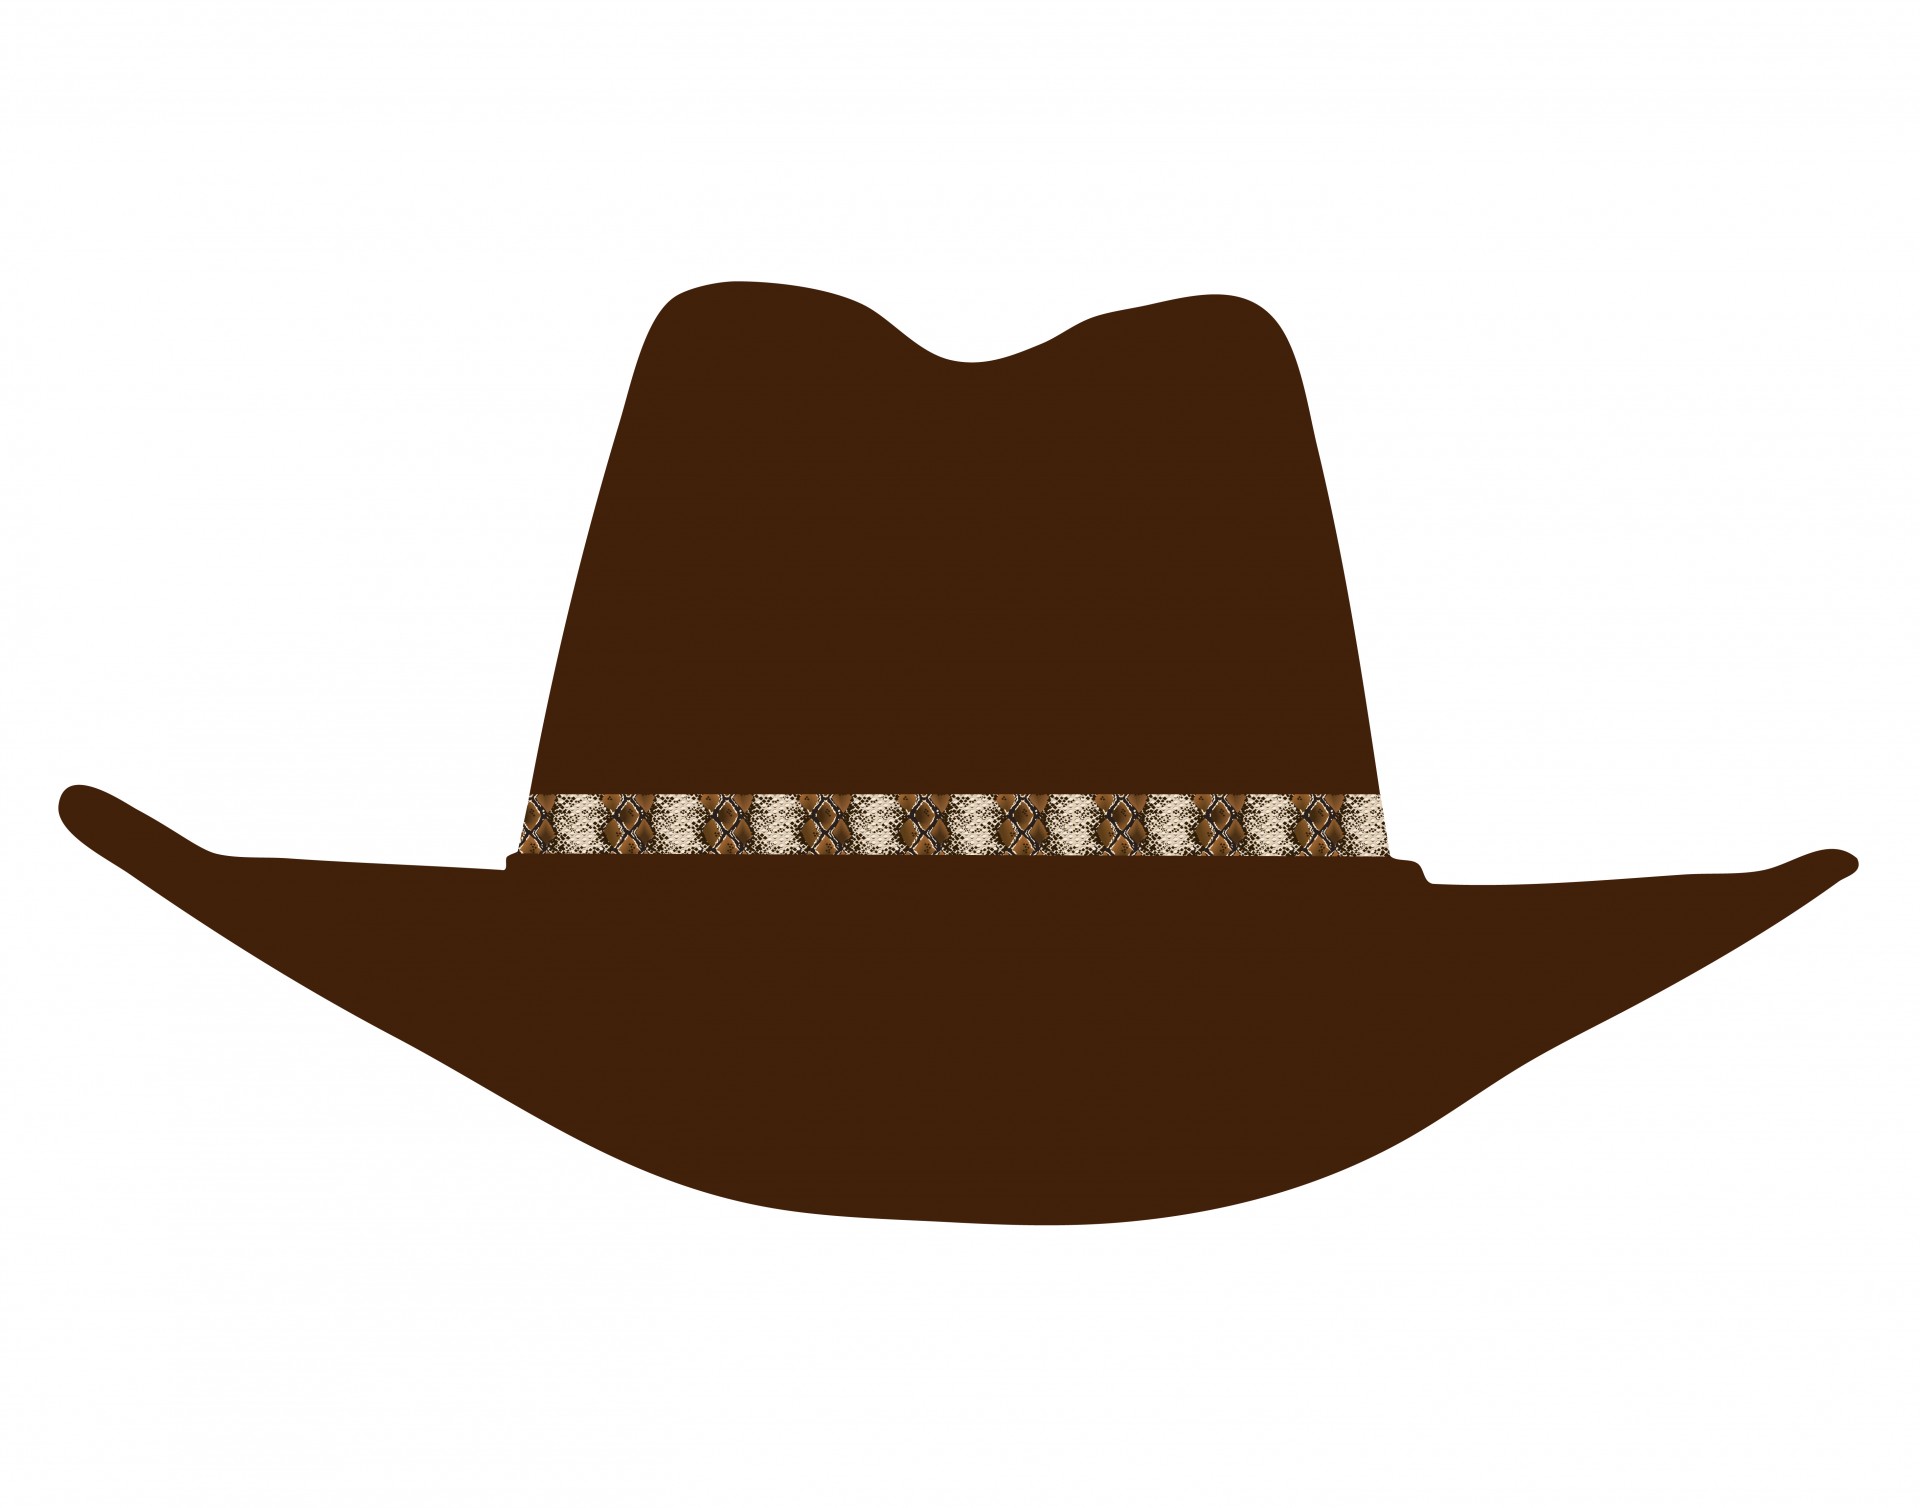 clipart of hats free - photo #32